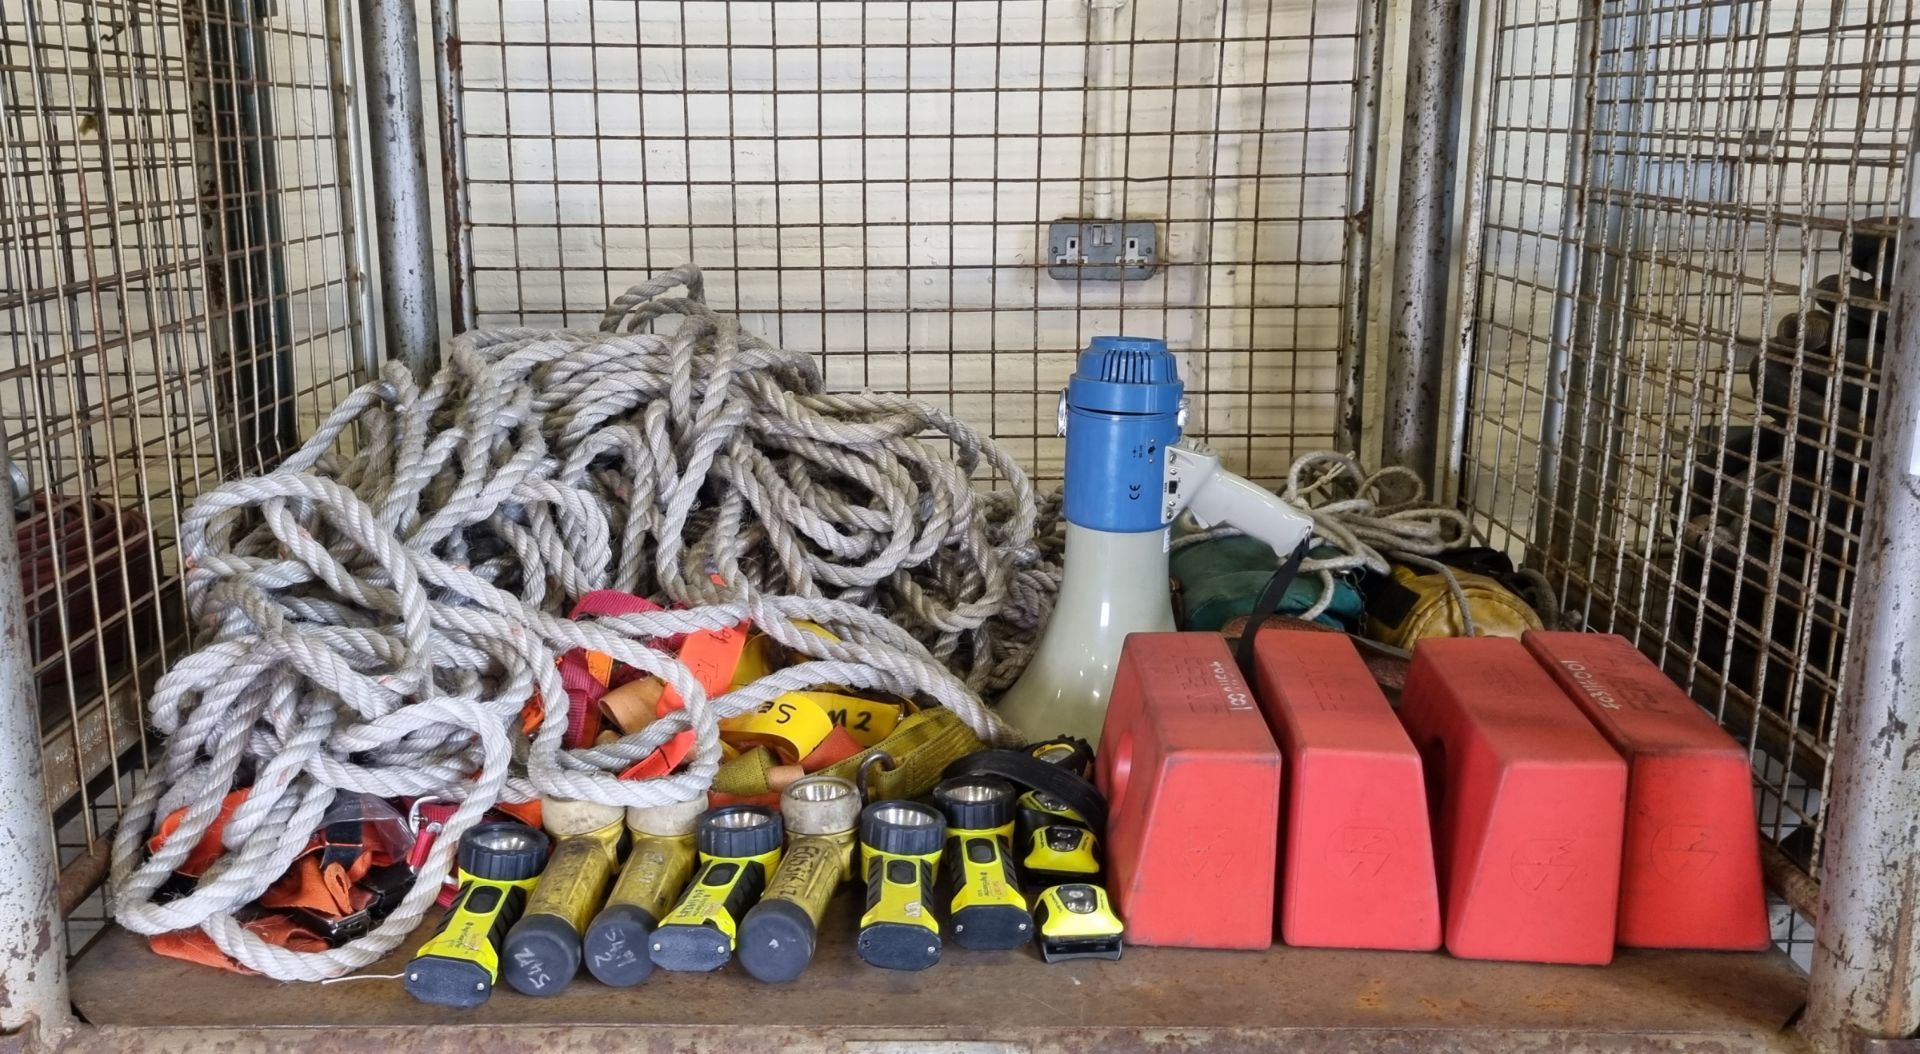 Rescue and ground support equipment - Ferno immobiliser blocks and straps, lights, rope and harnesse